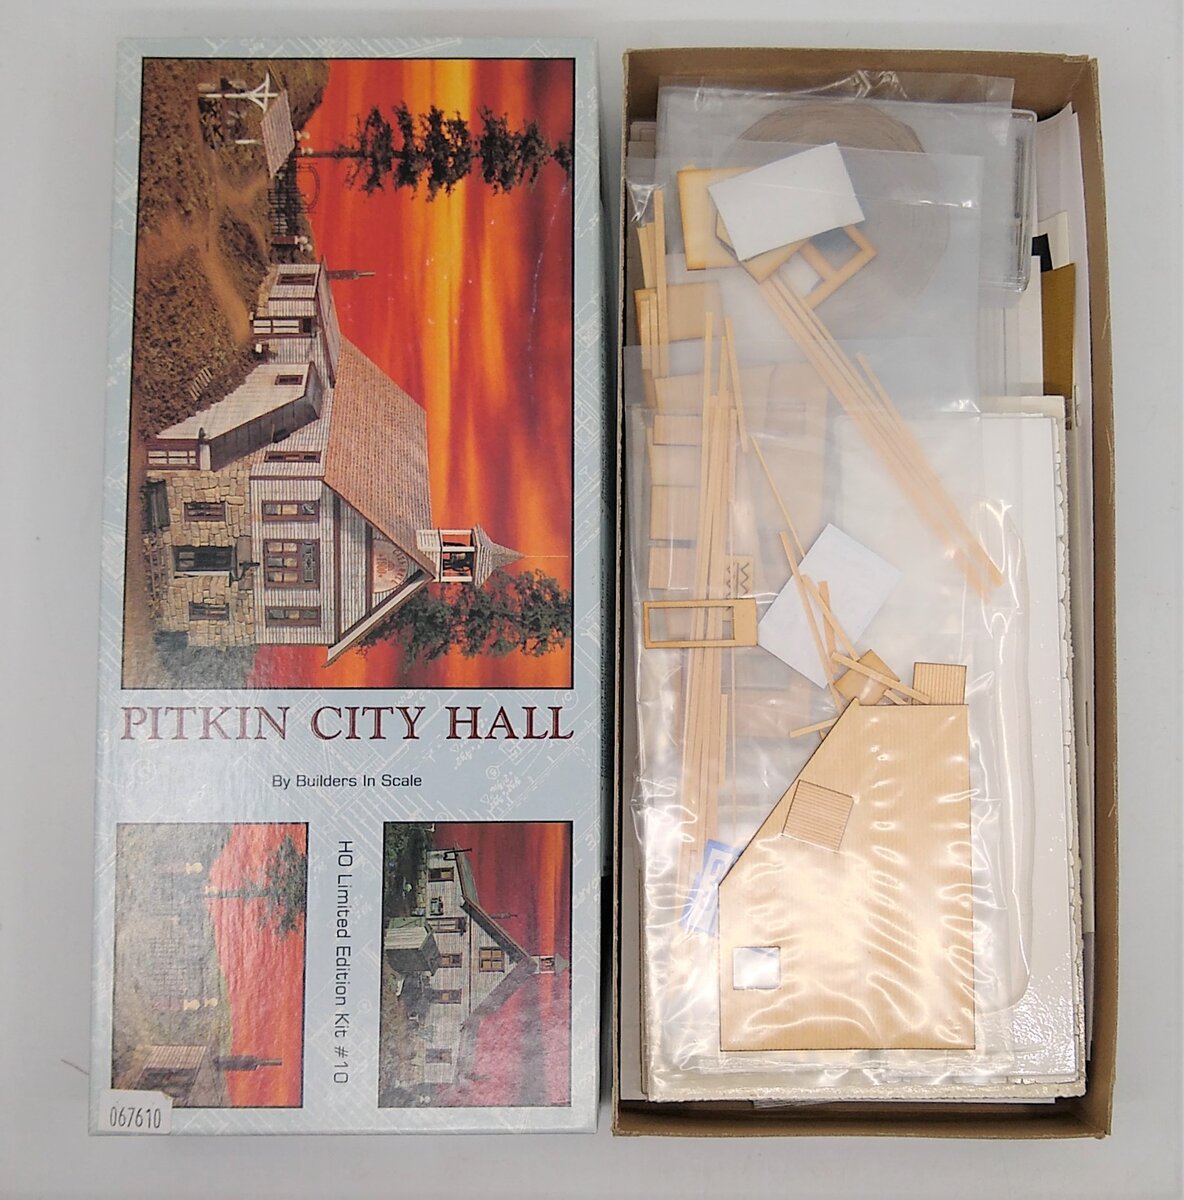 Builders-in-Scale #10 HO Scale Pitkin City Hall Kit